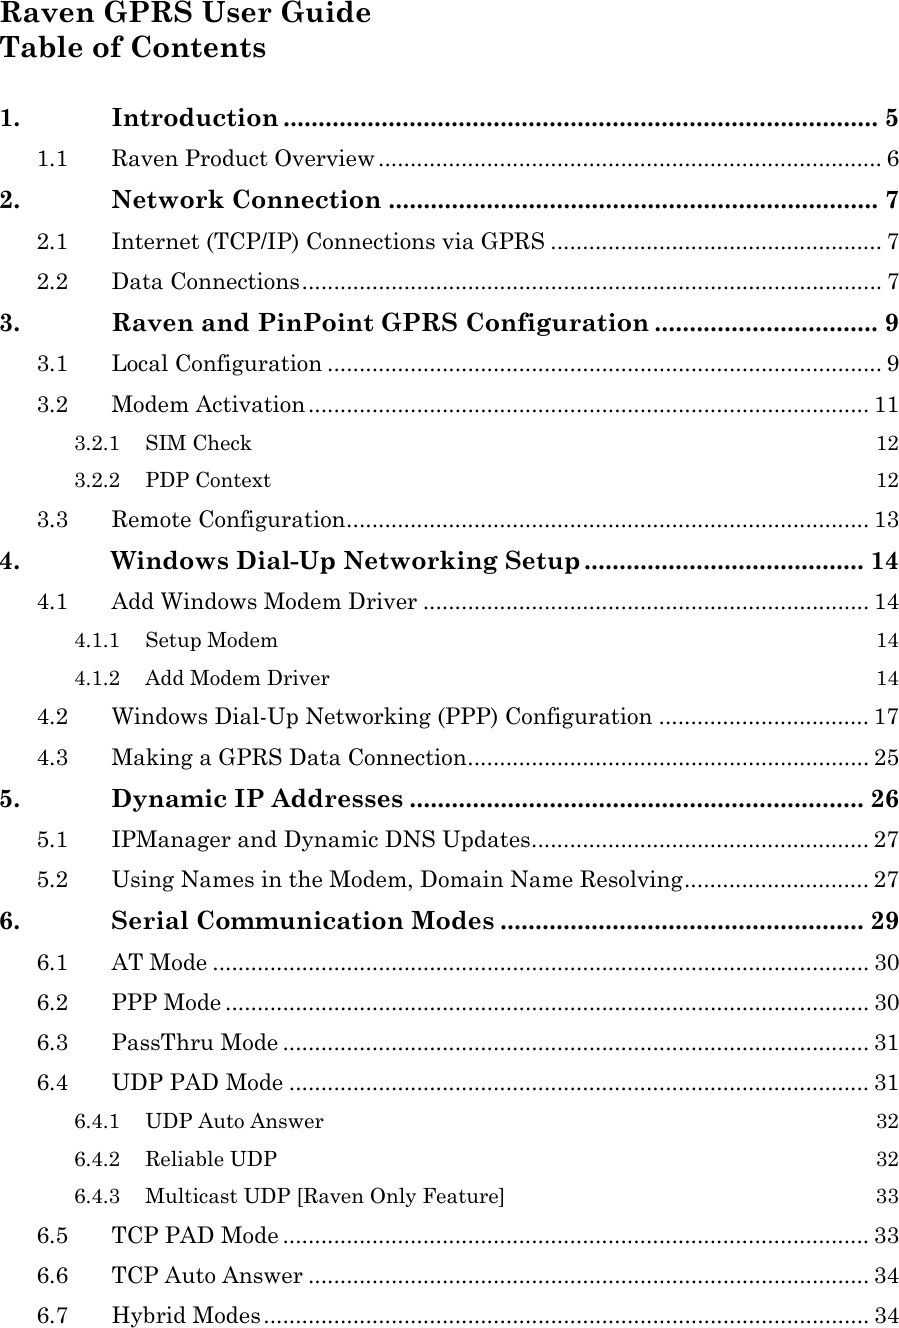 Raven GPRS User Guide Table of Contents  1. Introduction ..................................................................................... 5 1.1 Raven Product Overview ............................................................................... 6 2. Network Connection ...................................................................... 7 2.1 Internet (TCP/IP) Connections via GPRS .................................................... 7 2.2 Data Connections........................................................................................... 7 3. Raven and PinPoint GPRS Configuration ................................ 9 3.1 Local Configuration ....................................................................................... 9 3.2 Modem Activation........................................................................................ 11 3.2.1 SIM Check  12 3.2.2 PDP Context  12 3.3 Remote Configuration.................................................................................. 13 4. Windows Dial-Up Networking Setup ........................................ 14 4.1 Add Windows Modem Driver ...................................................................... 14 4.1.1 Setup Modem  14 4.1.2 Add Modem Driver  14 4.2 Windows Dial-Up Networking (PPP) Configuration ................................. 17 4.3 Making a GPRS Data Connection............................................................... 25 5. Dynamic IP Addresses ................................................................. 26 5.1 IPManager and Dynamic DNS Updates..................................................... 27 5.2 Using Names in the Modem, Domain Name Resolving............................. 27 6. Serial Communication Modes .................................................... 29 6.1 AT Mode ....................................................................................................... 30 6.2 PPP Mode ..................................................................................................... 30 6.3 PassThru Mode ............................................................................................ 31 6.4 UDP PAD Mode ........................................................................................... 31 6.4.1 UDP Auto Answer  32 6.4.2 Reliable UDP  32 6.4.3 Multicast UDP [Raven Only Feature]  33 6.5 TCP PAD Mode ............................................................................................ 33 6.6 TCP Auto Answer ........................................................................................ 34 6.7 Hybrid Modes............................................................................................... 34 